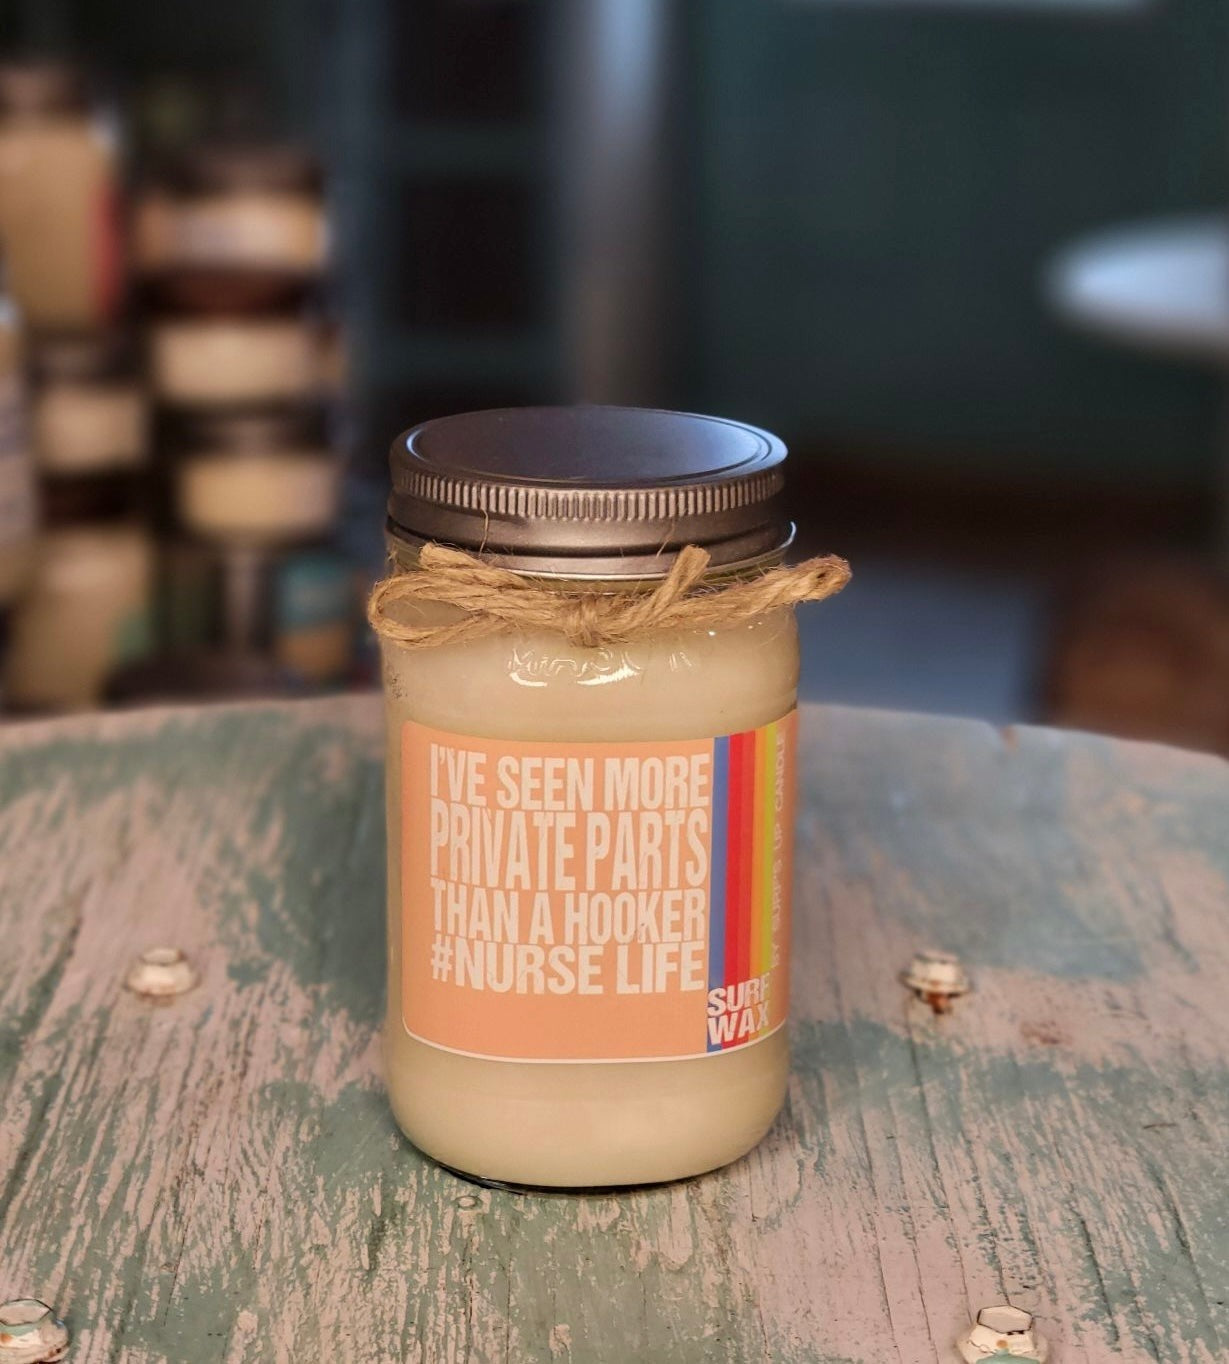 Nurse Life Surf Wax Mason Jar Candle - Not Your Mother's Collection